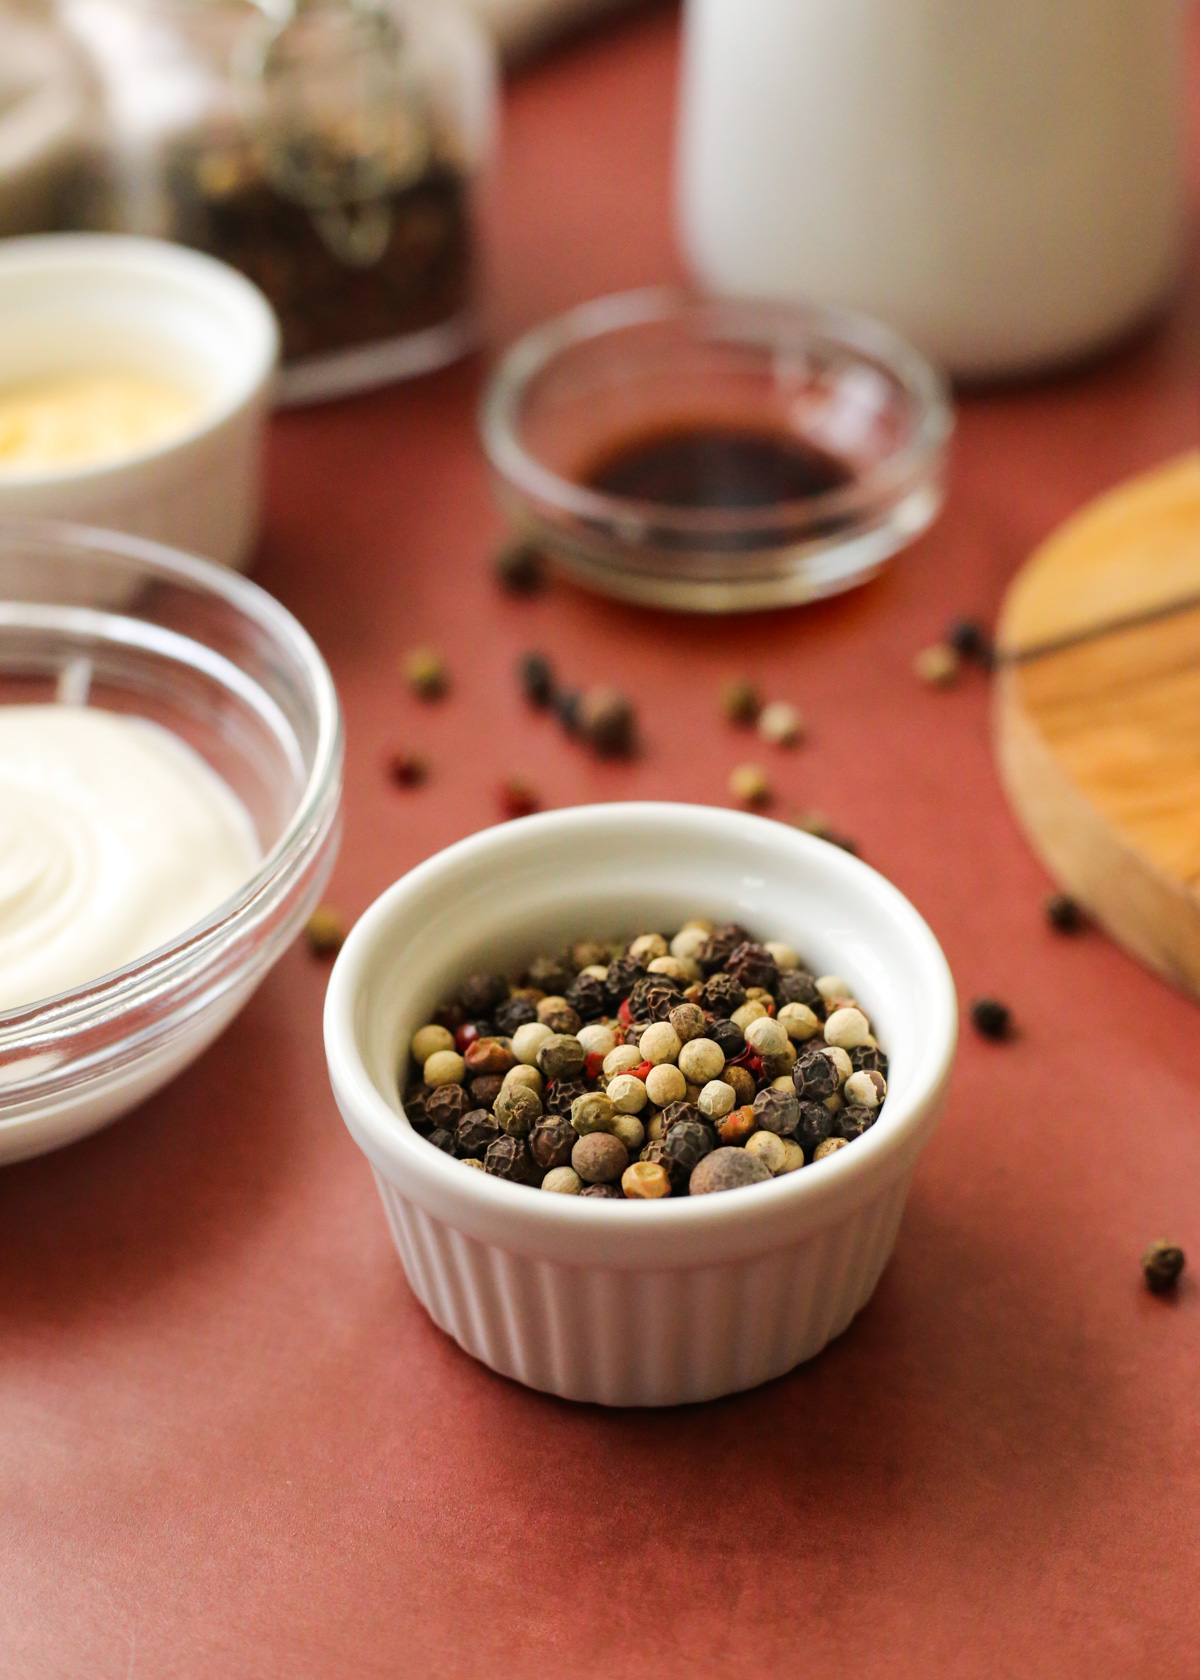 An angled view into a small white ramekin filled with whole peppercorns in varying shades of brown, white, and red, with additional ingredients to make a creamy peppercorn dressing in other small prep bowls in the background